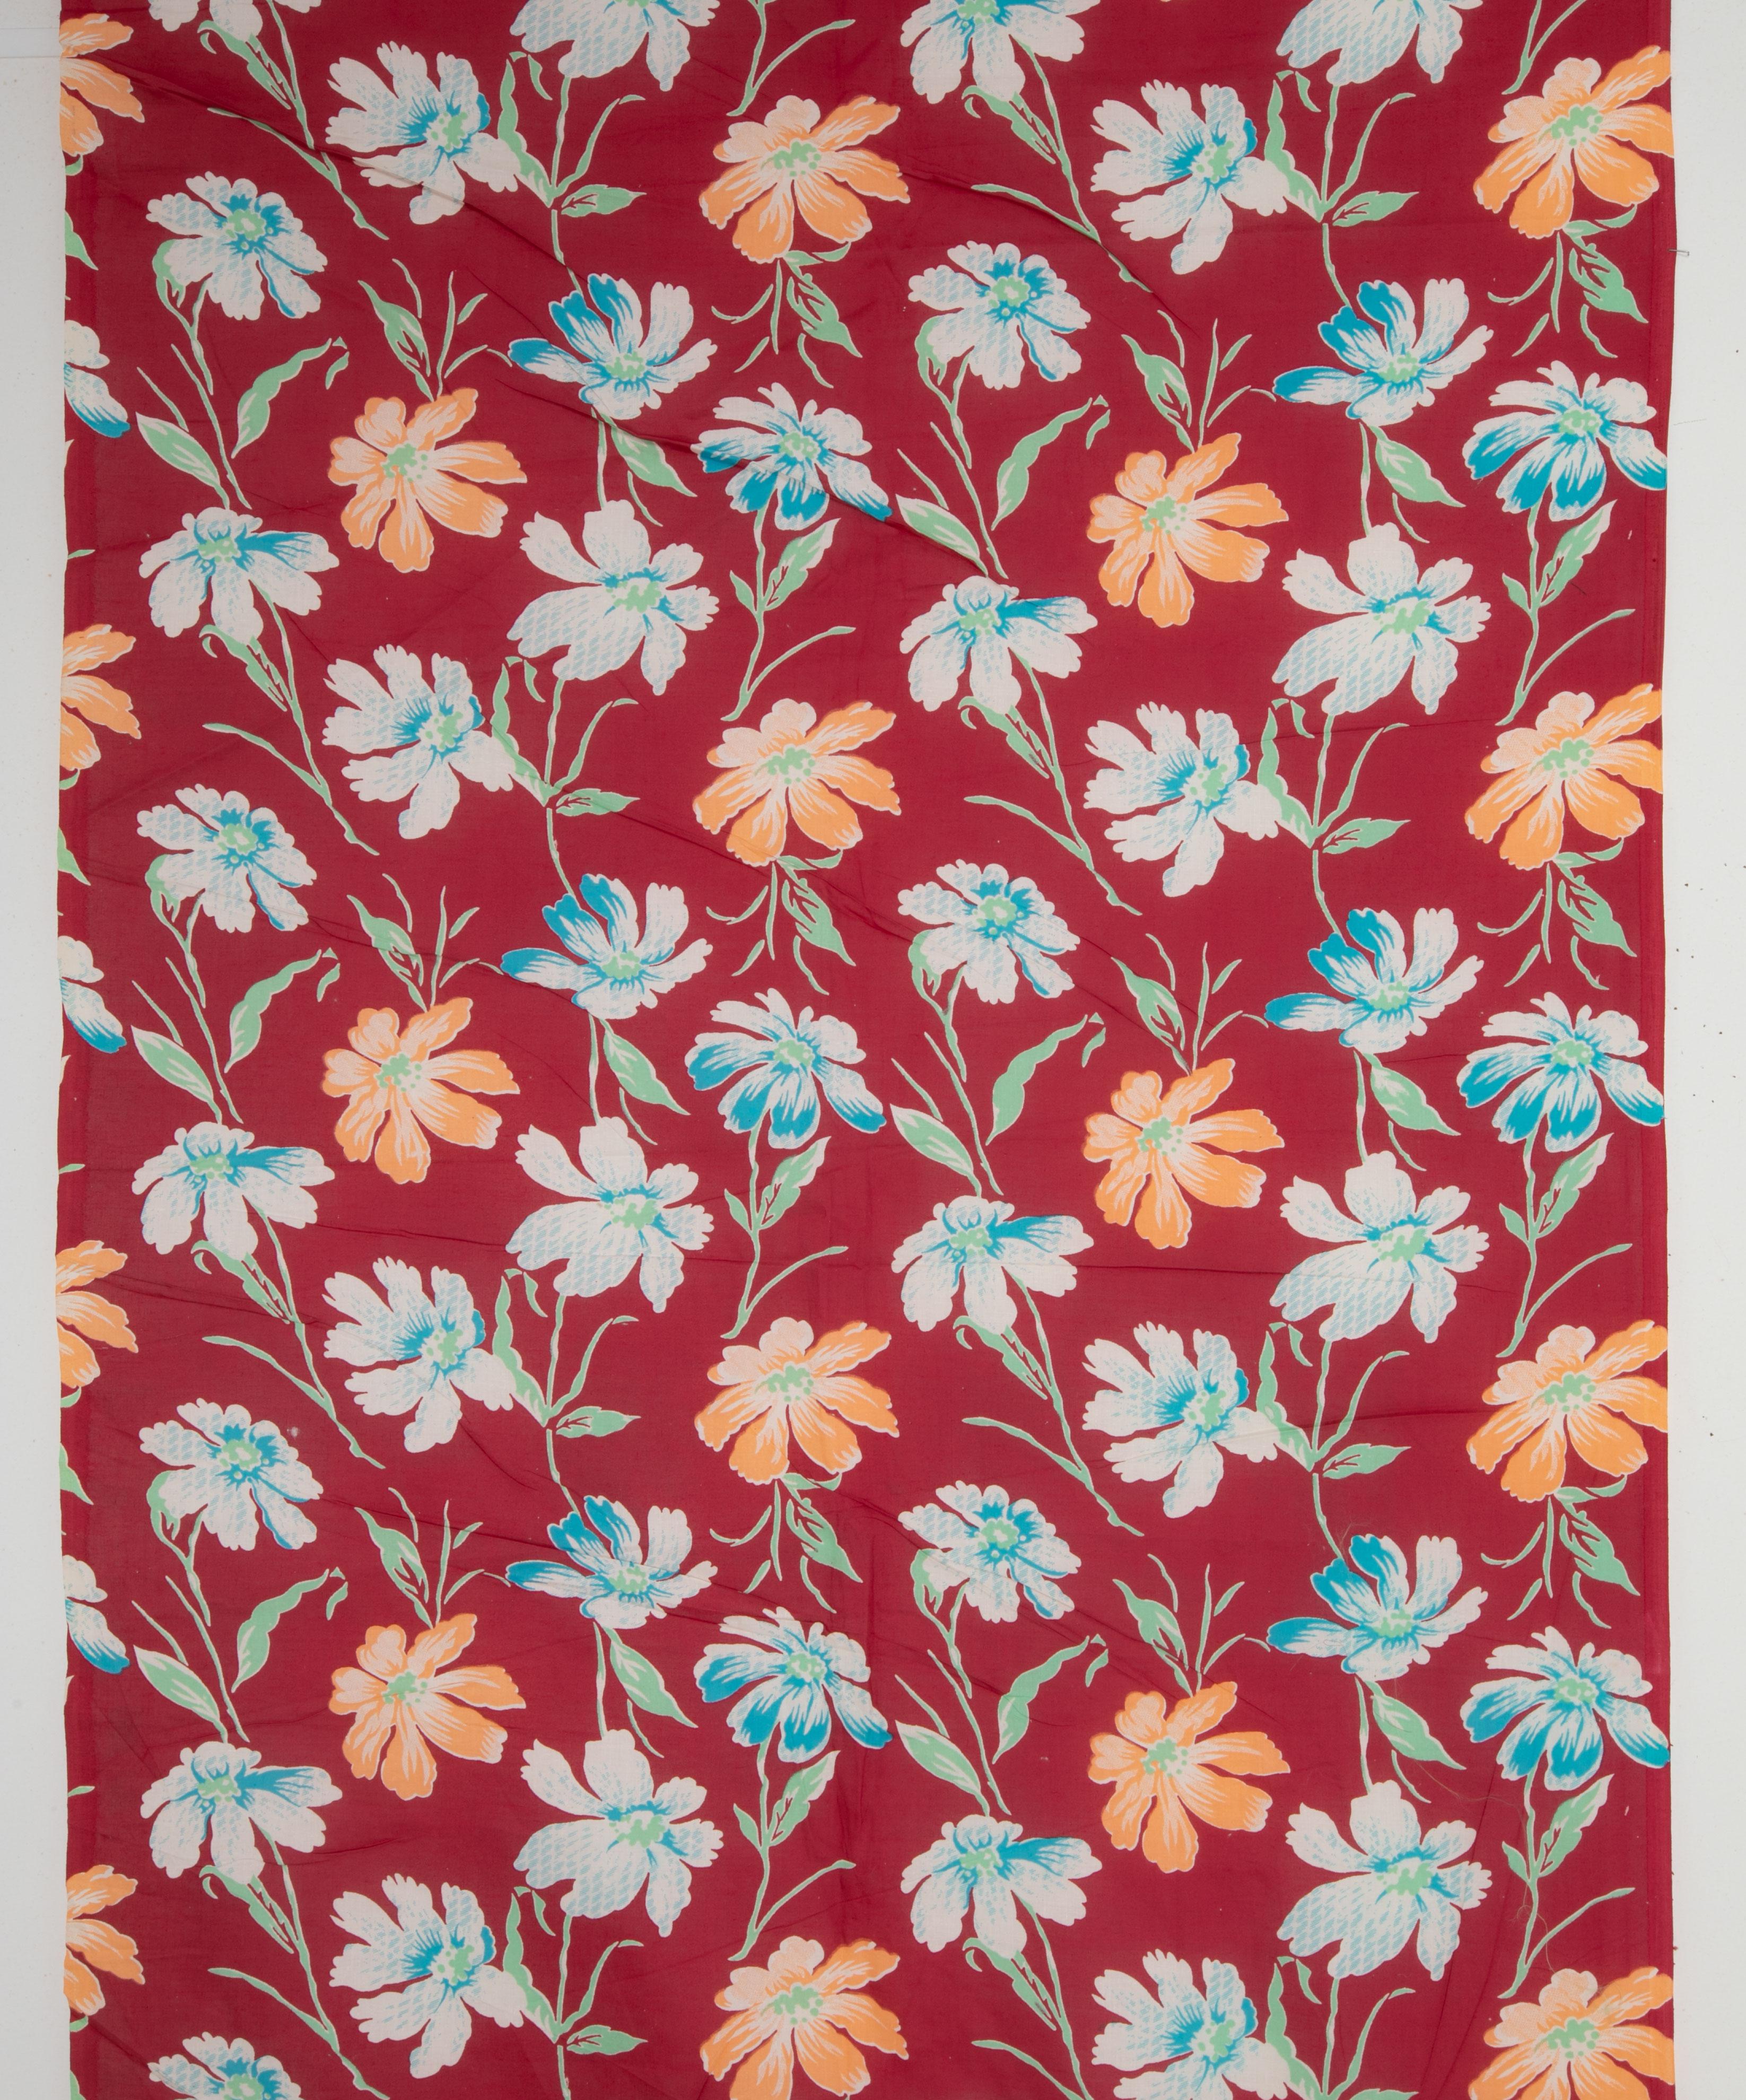 Mid-Century Modern Russian Roller Printed Cotton Fabric Panel, Mid-20th Century or Earlier